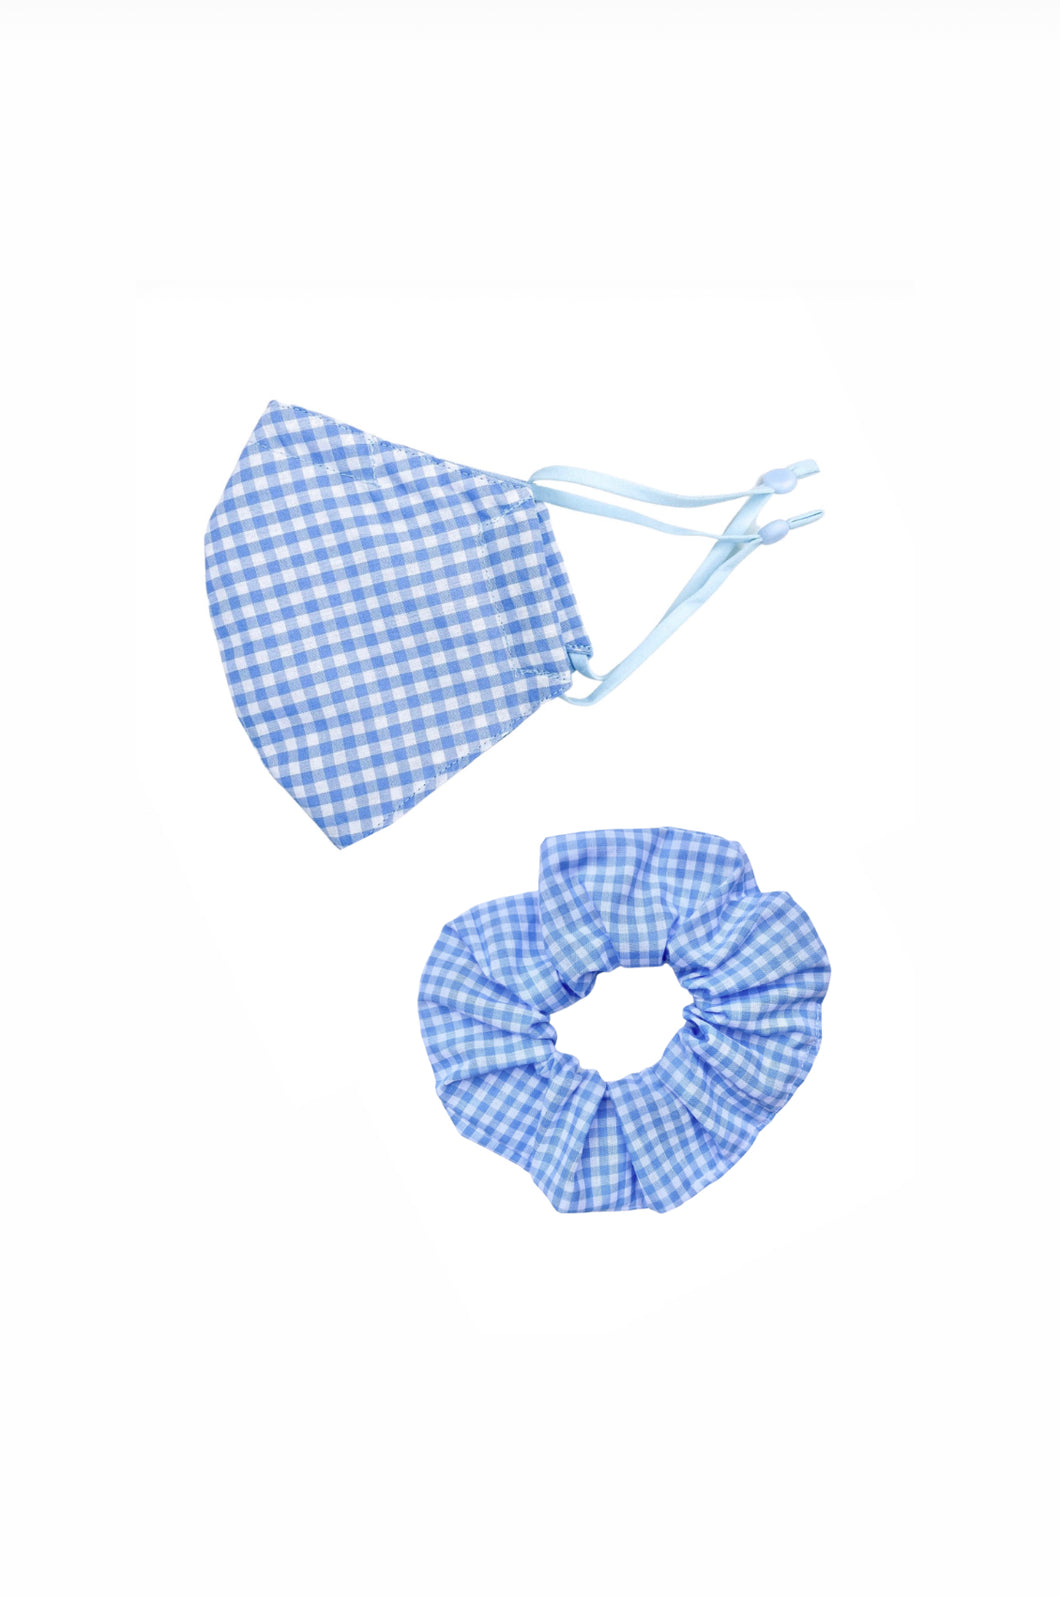 Blue Gingham - Face Mask and Scrunchie- Matchy Matchy -Handmade